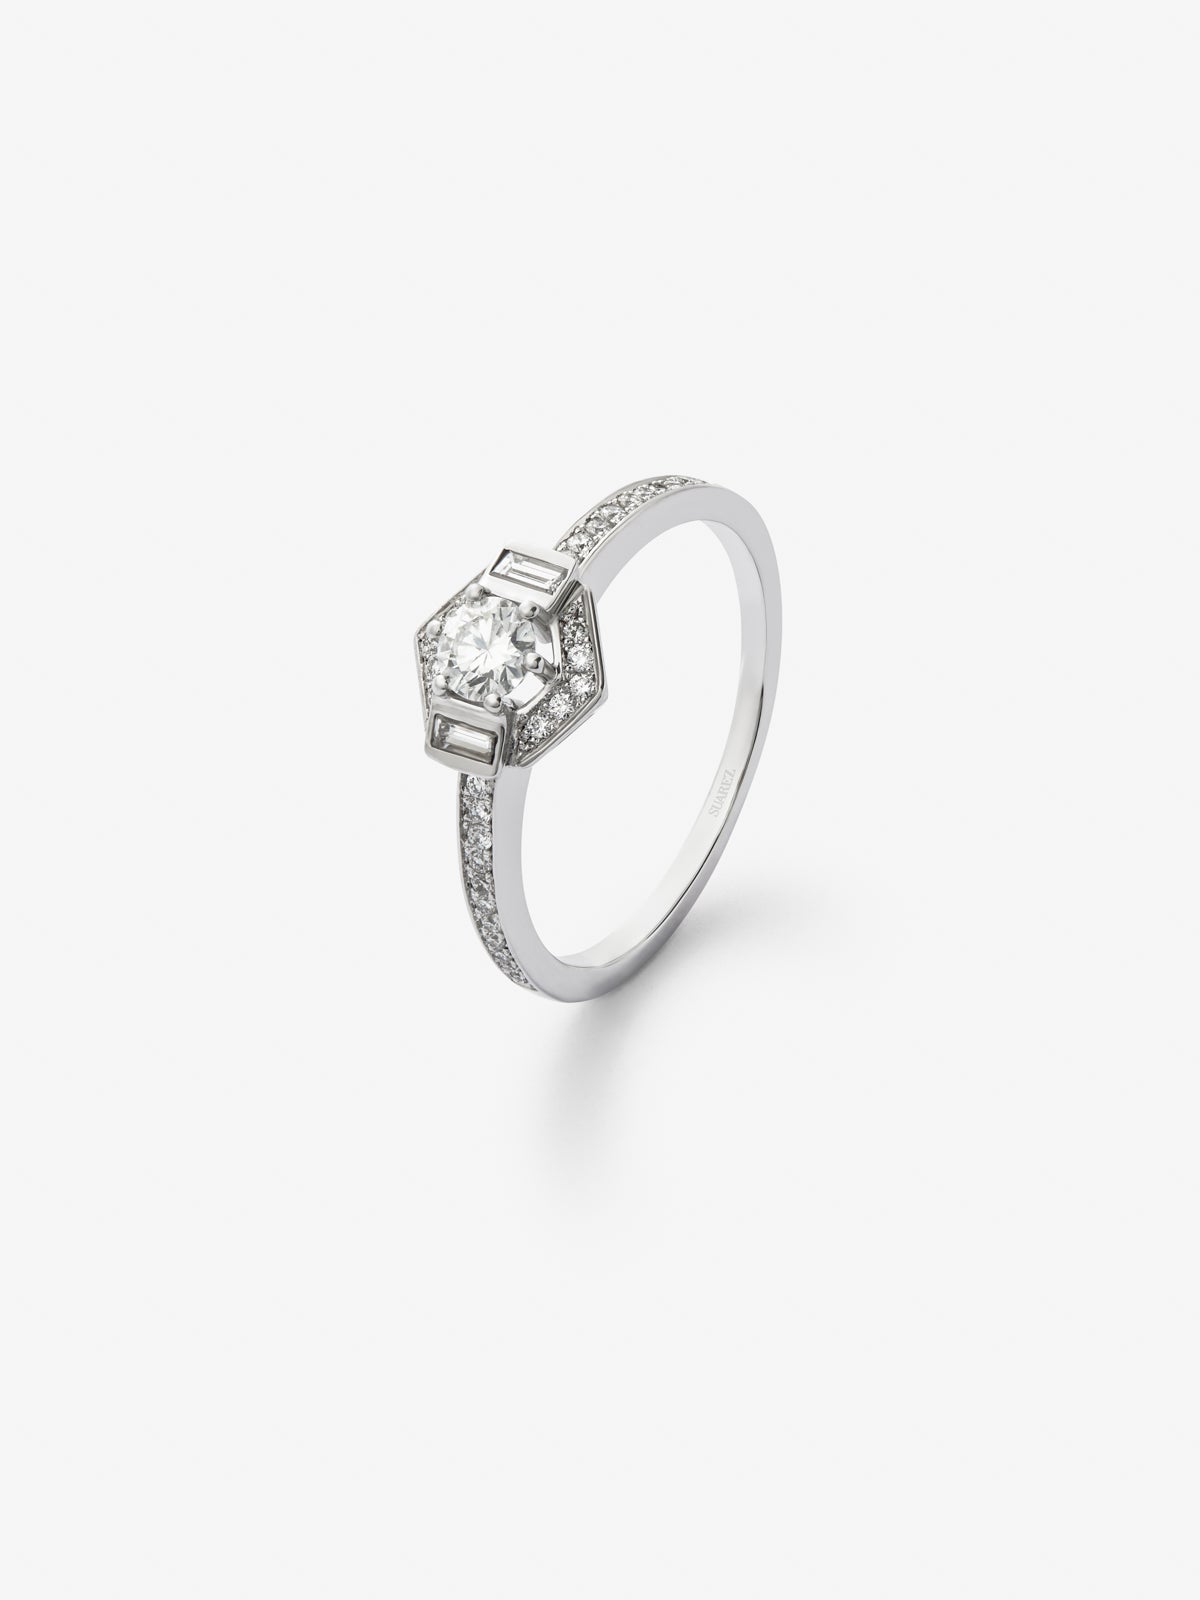 18K white gold ring with a 0.2 ct brilliant-cut central diamond; 2 in baguette cut with a total of 0.05 cts and 38 in brilliant cut with a total of 0.12 cts